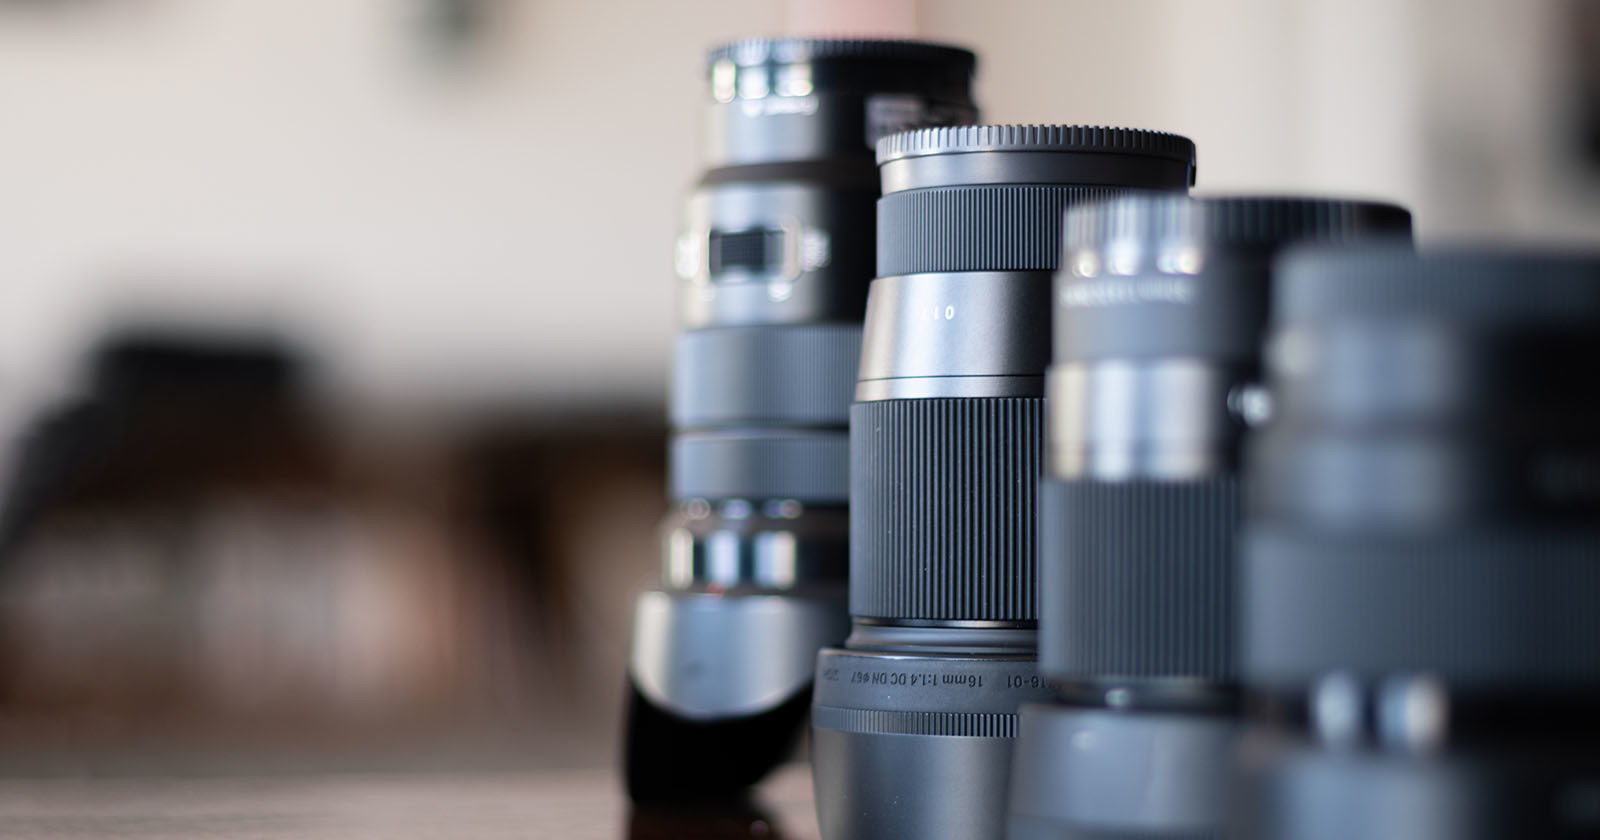 What is Focus Breathing in a Camera Lens?